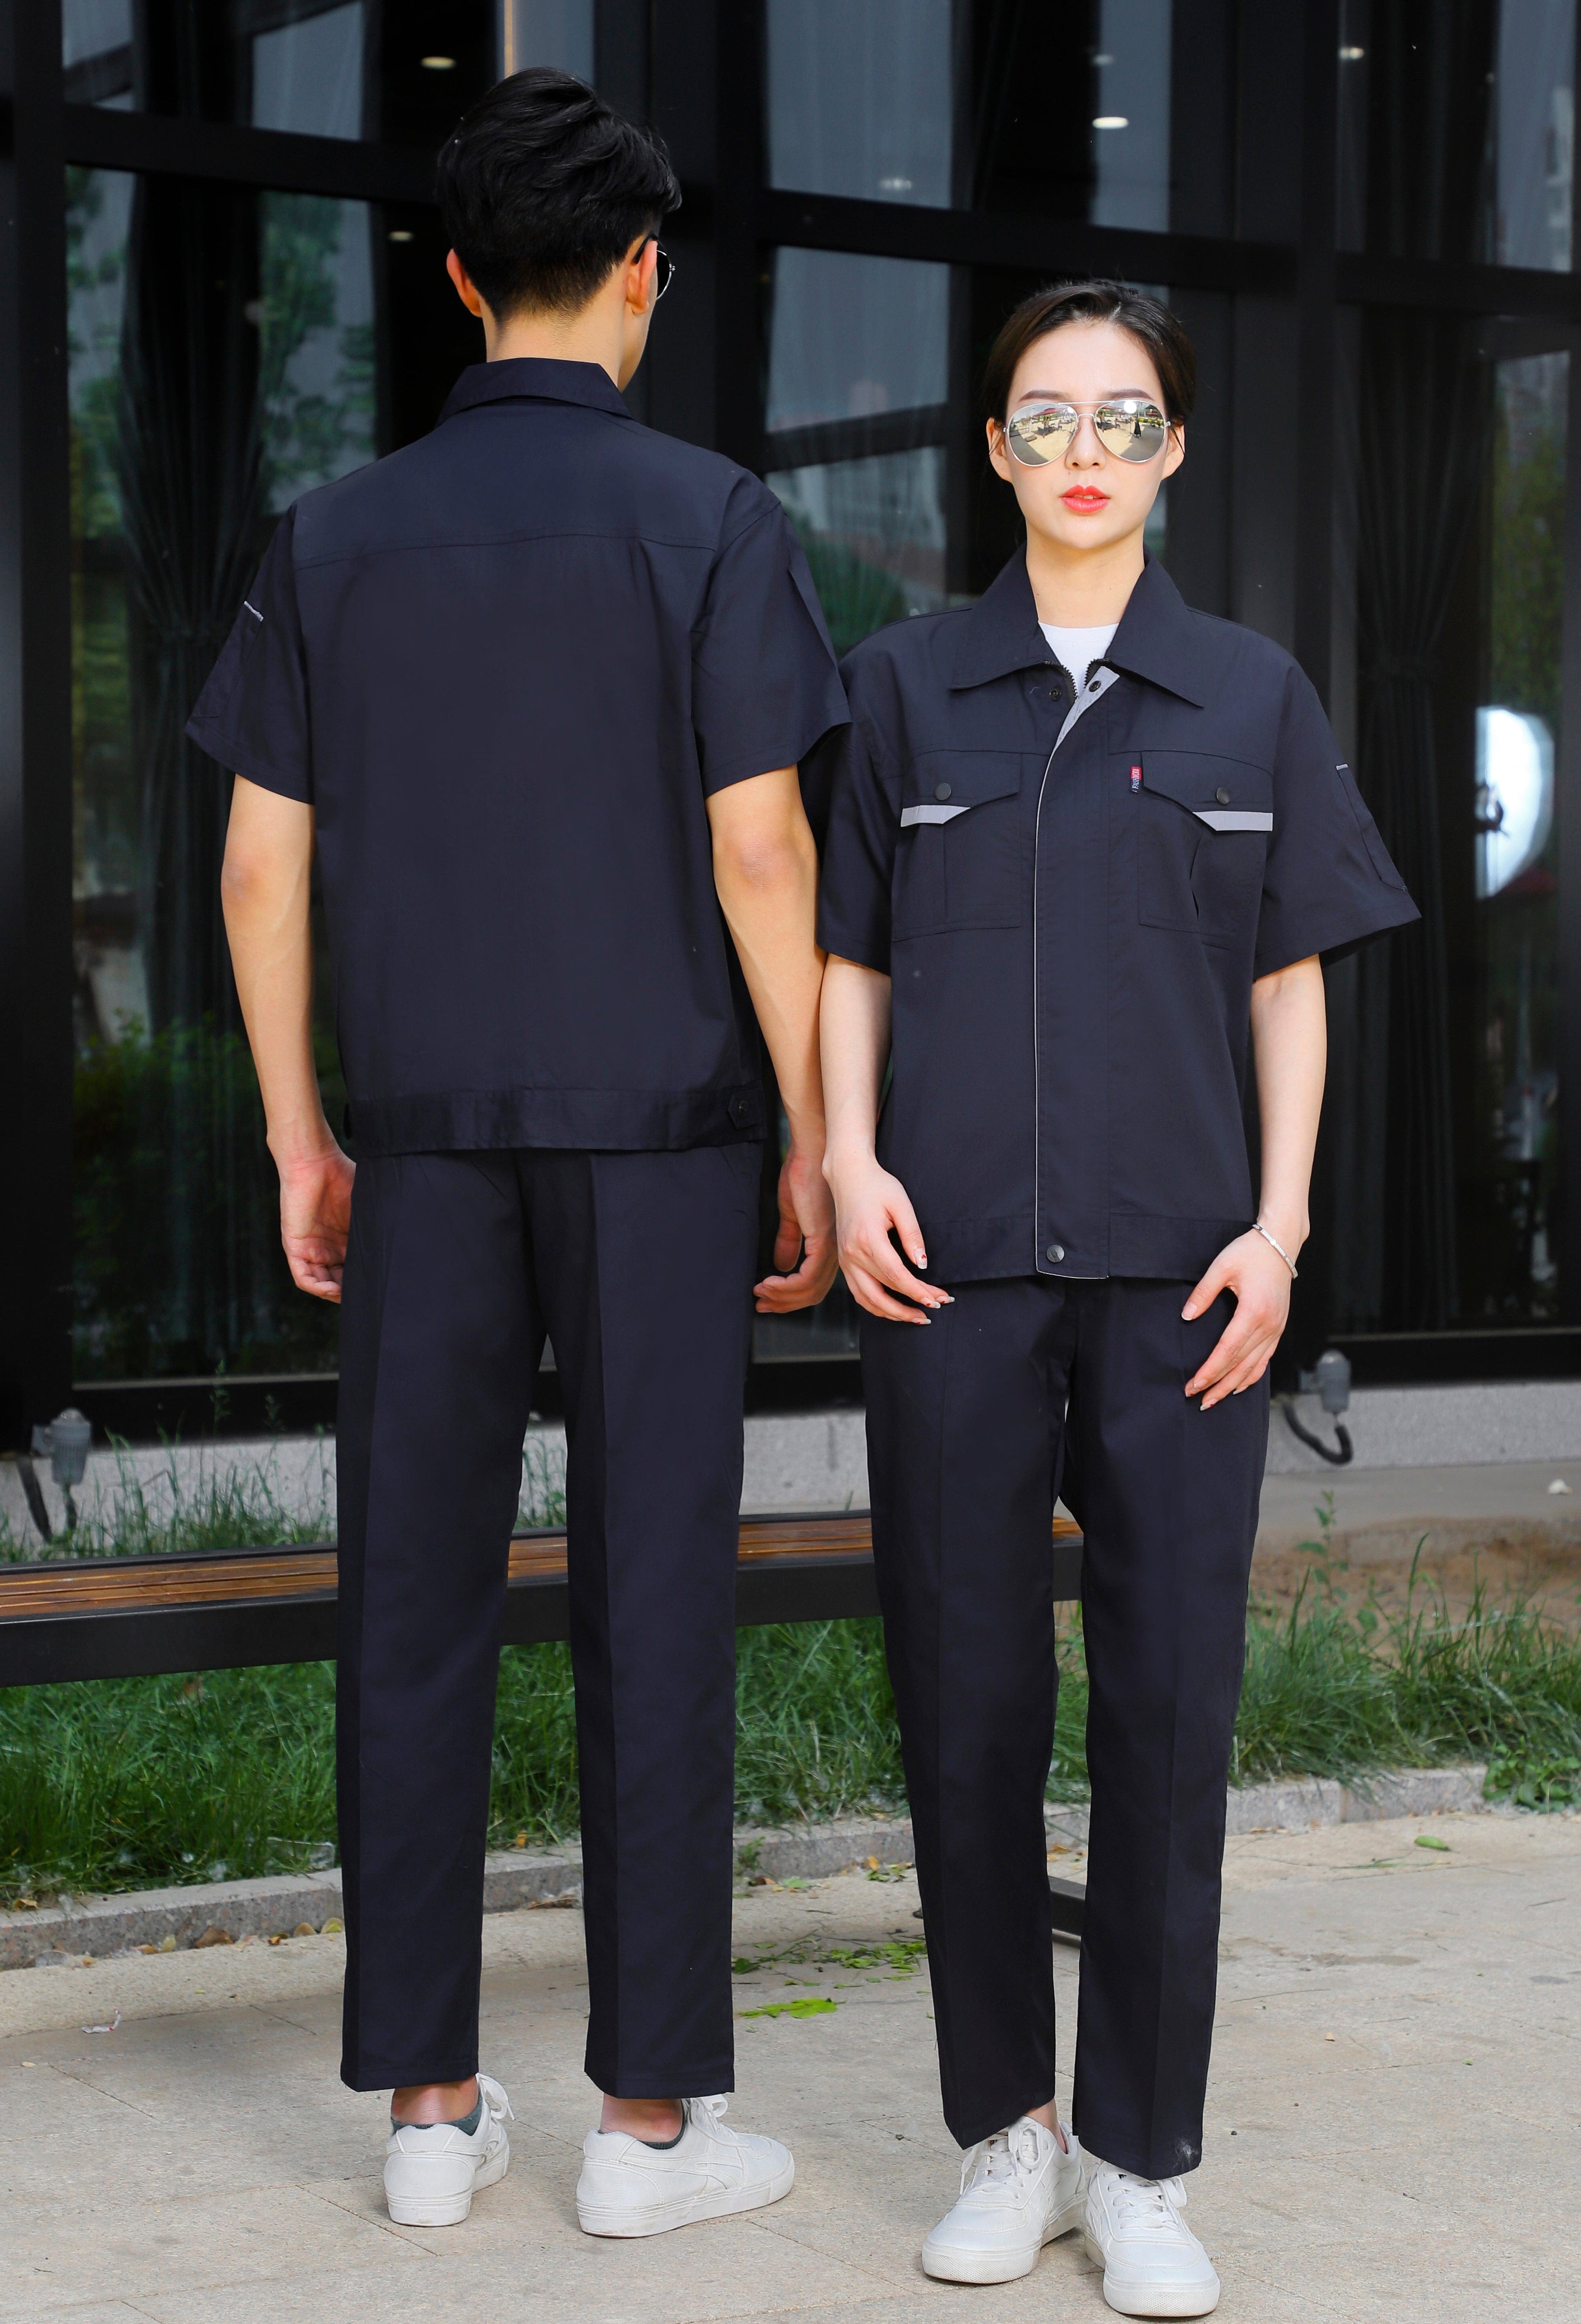 Corals Trading Co. 可樂思百貨商行 涤棉 Short-sleeved polyester cotton overalls for summer SD-S301